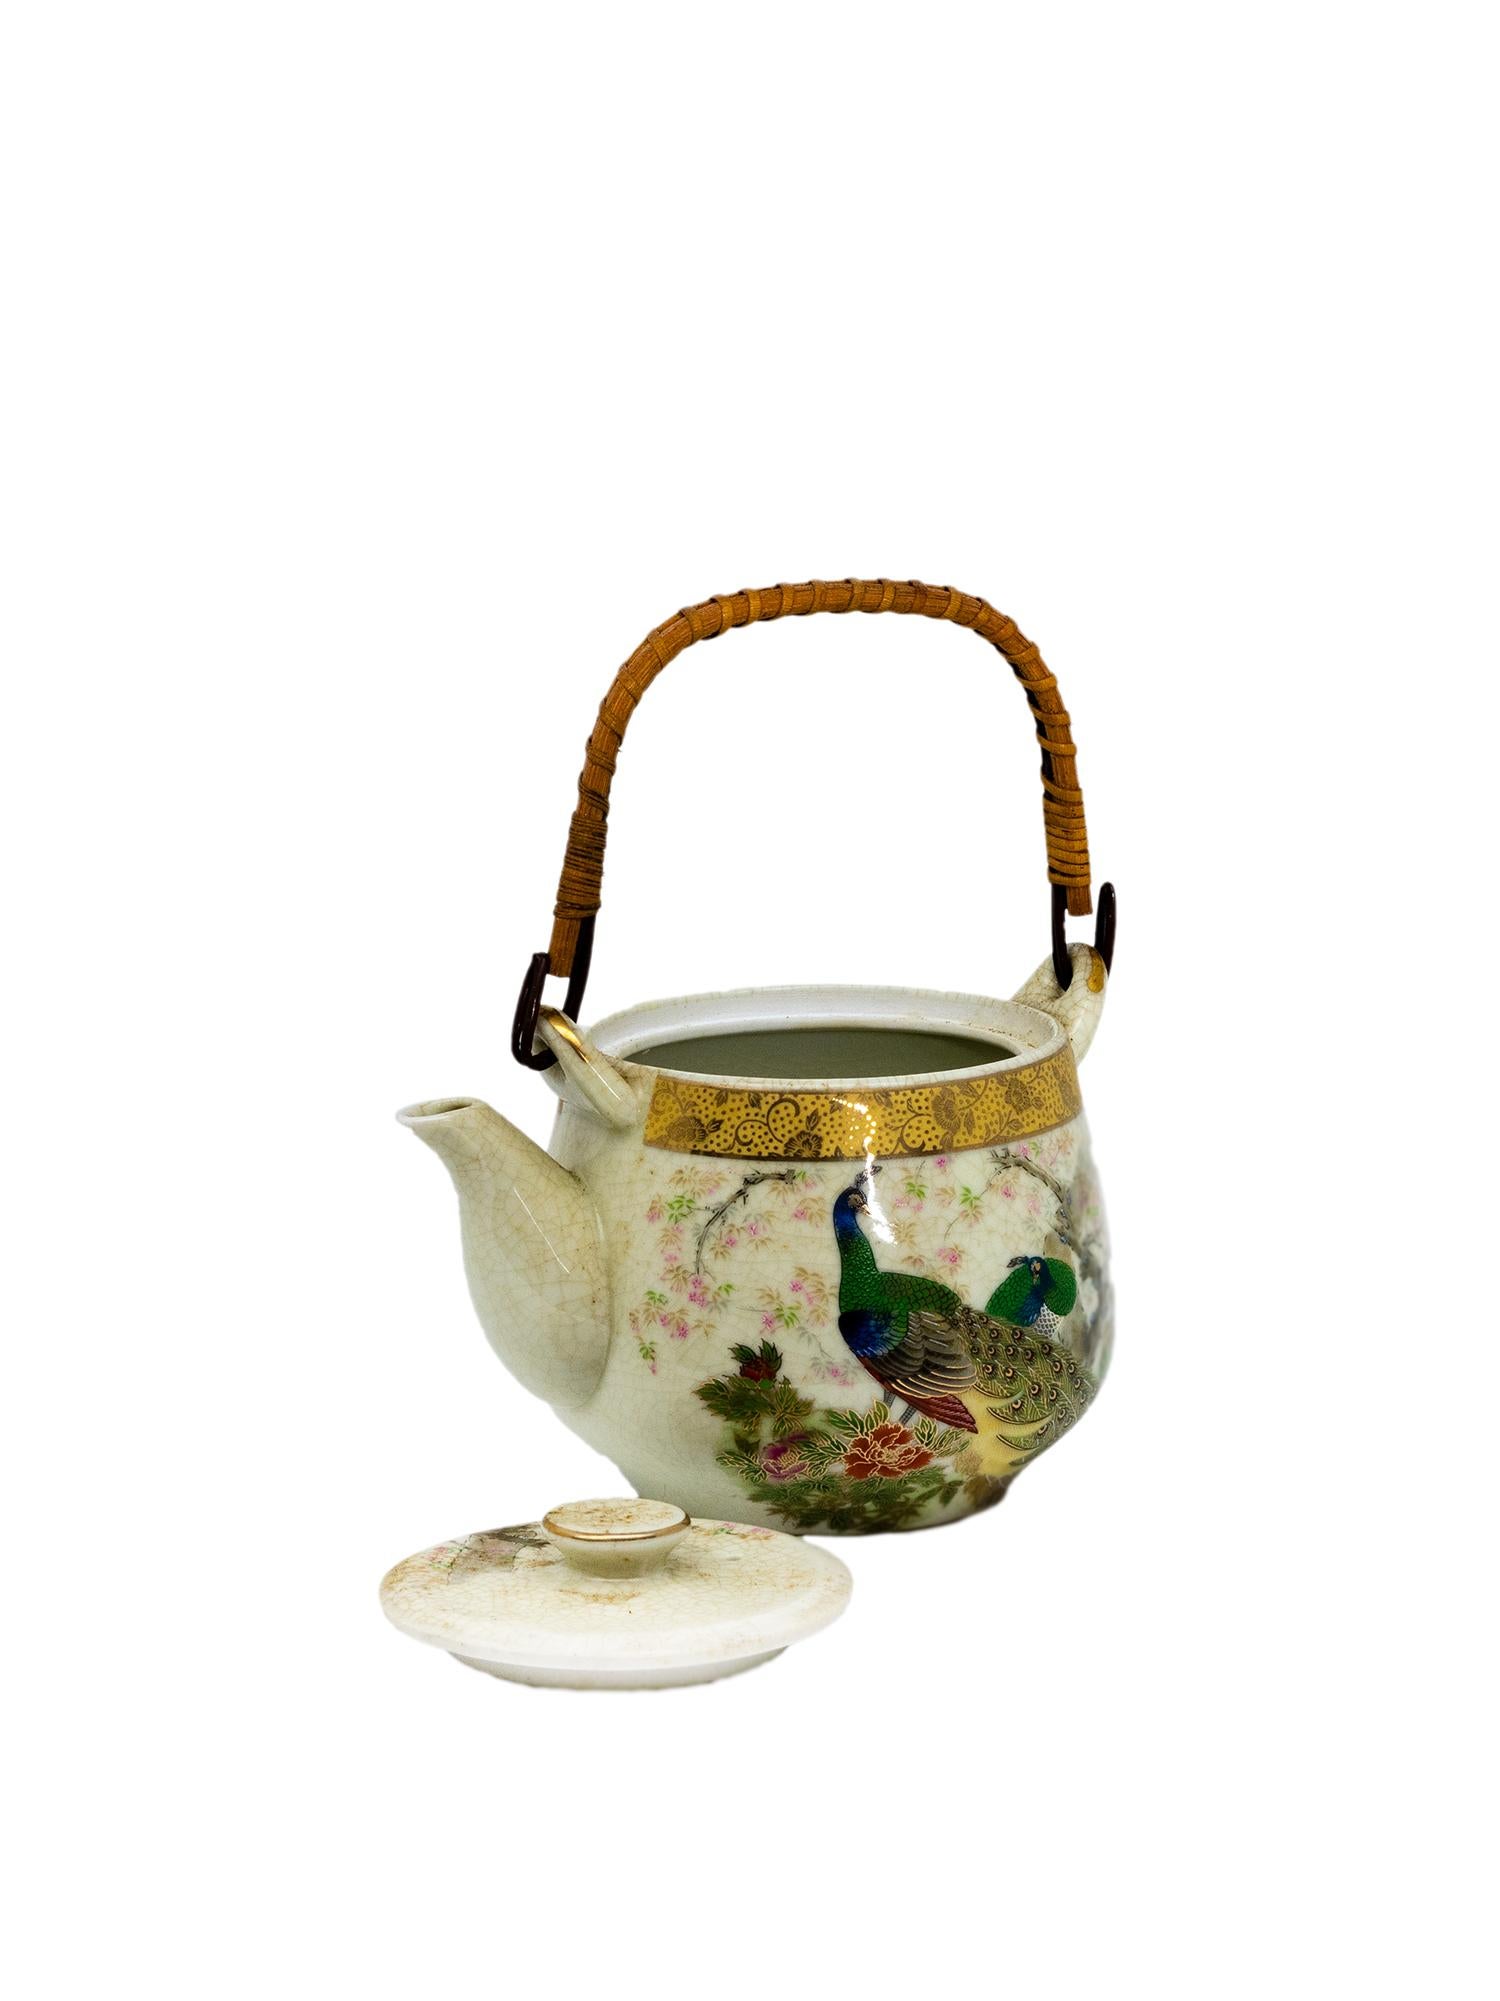 A Japanese white porcelain tea pot with golden rim and an imperial peacock in the side.
Golden mark in the base 
'Japan' from the Miya Company.